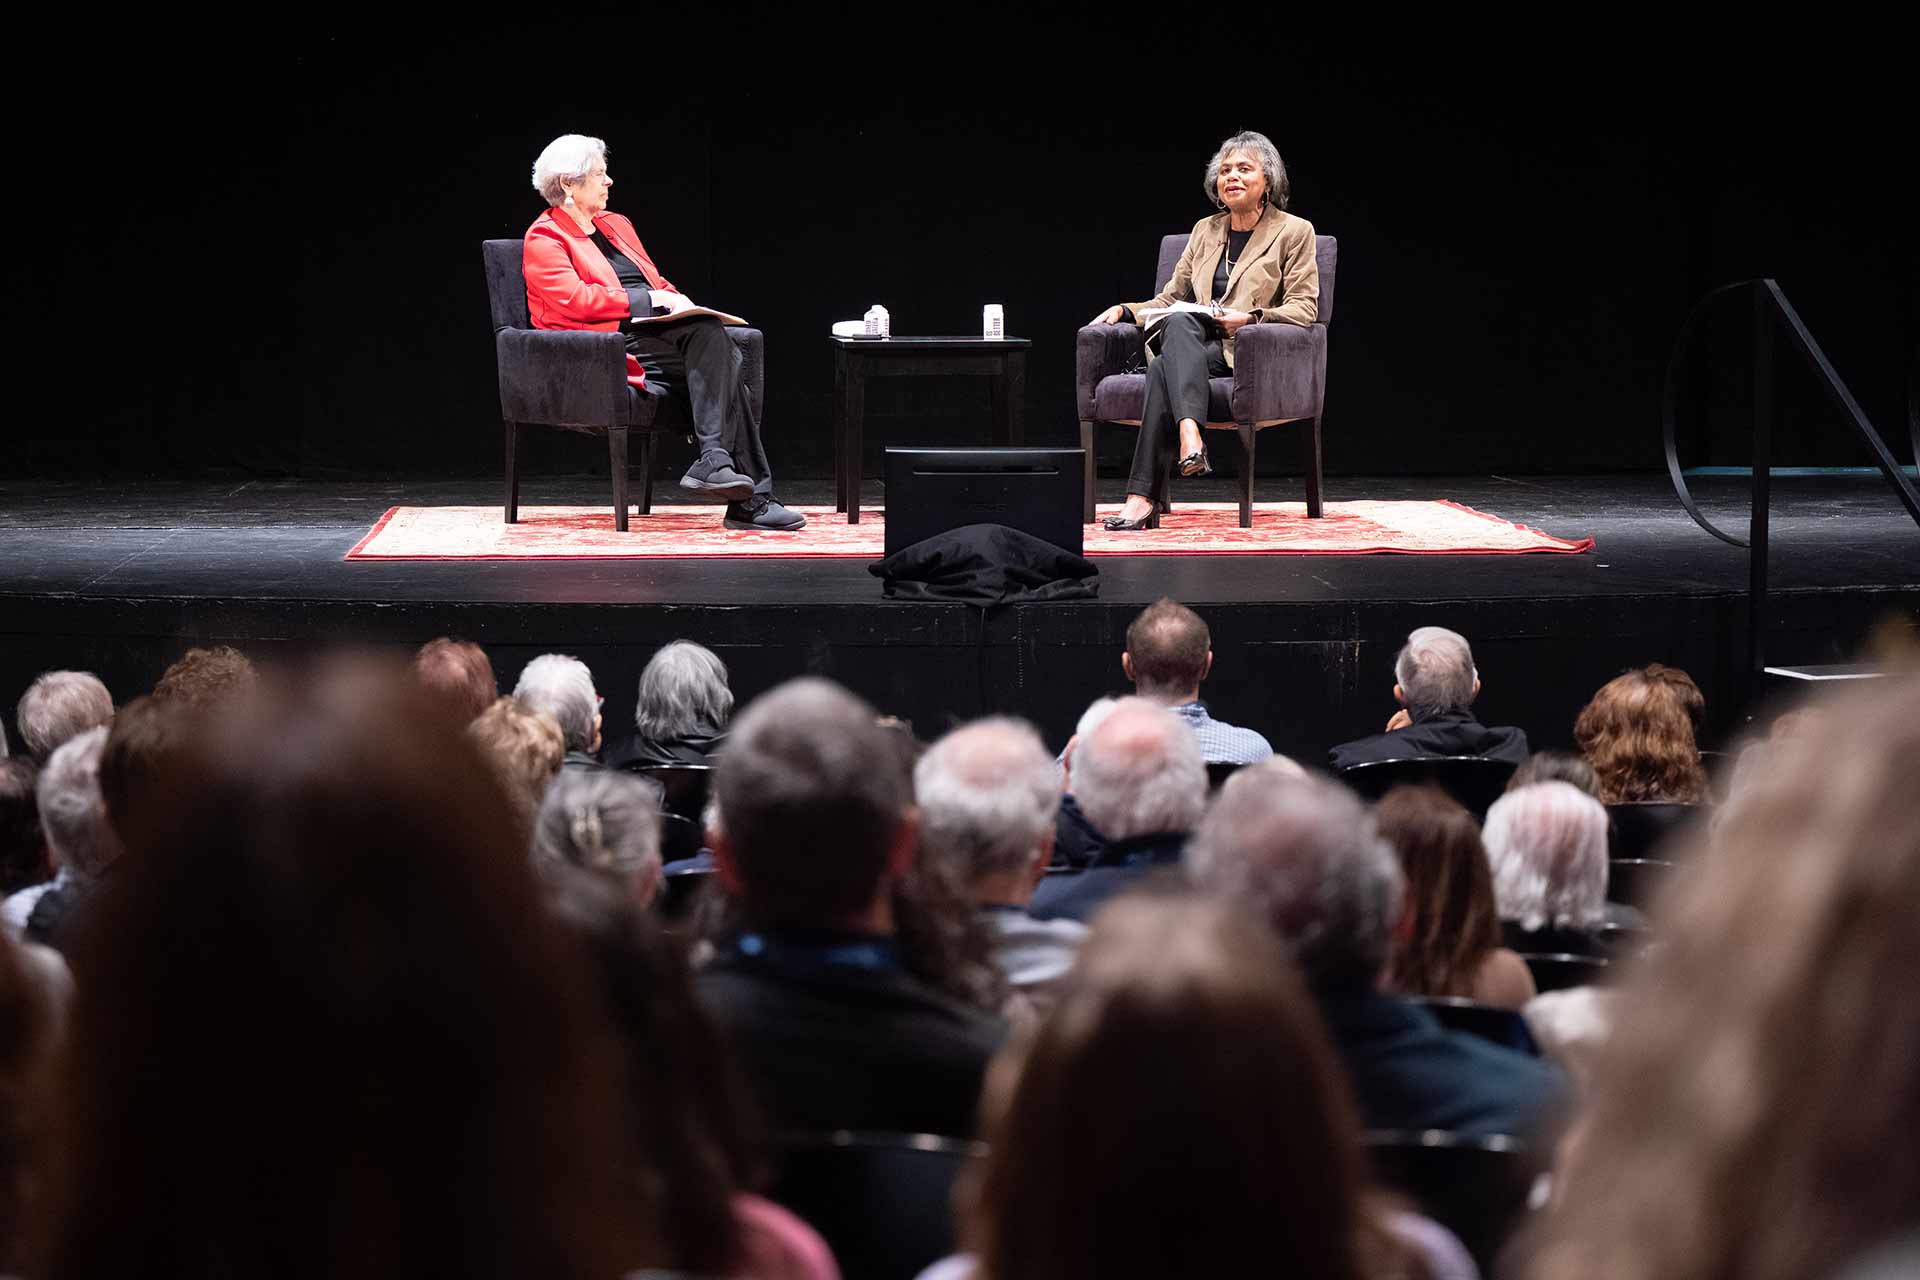 Joyce Antler and Anita Hill on stage in front of an audience